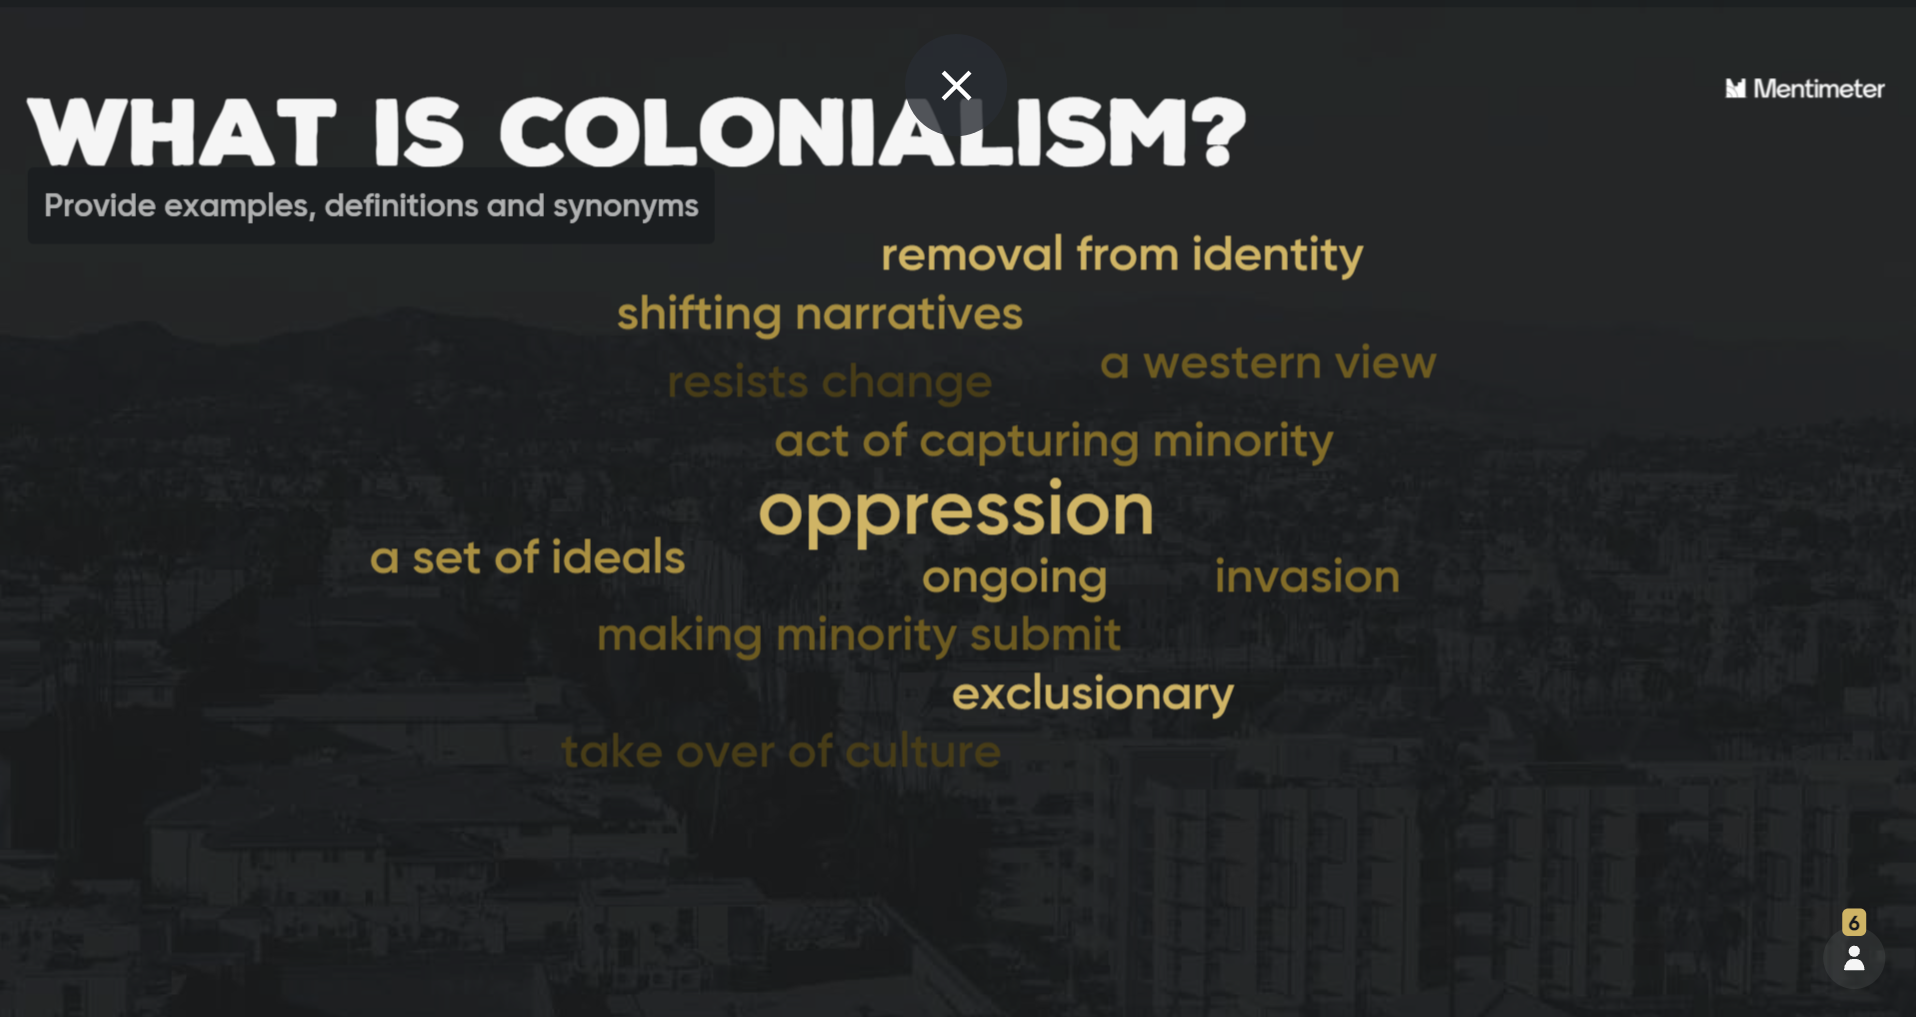 A screenshot of a word cloud slide with light coloured text against a contrasting dark monochromatic background of a picture of a town. The question, “What is colonialism” is in bold, white, all-caps text on the top left-hand side of the slide with sub-text underneath in smaller, writing underneath stating “Provide examples, definitions and synonyms”. The word cloud text is in various shades of gold with the following words and phrases (listed from biggest and boldest to lightest): oppression, removal from identity, exclusionary, shifting narratives, ongoing, a set of ideals, act of capturing minority, making minority submit, invasion, a western view, resists change, and take over of culture.